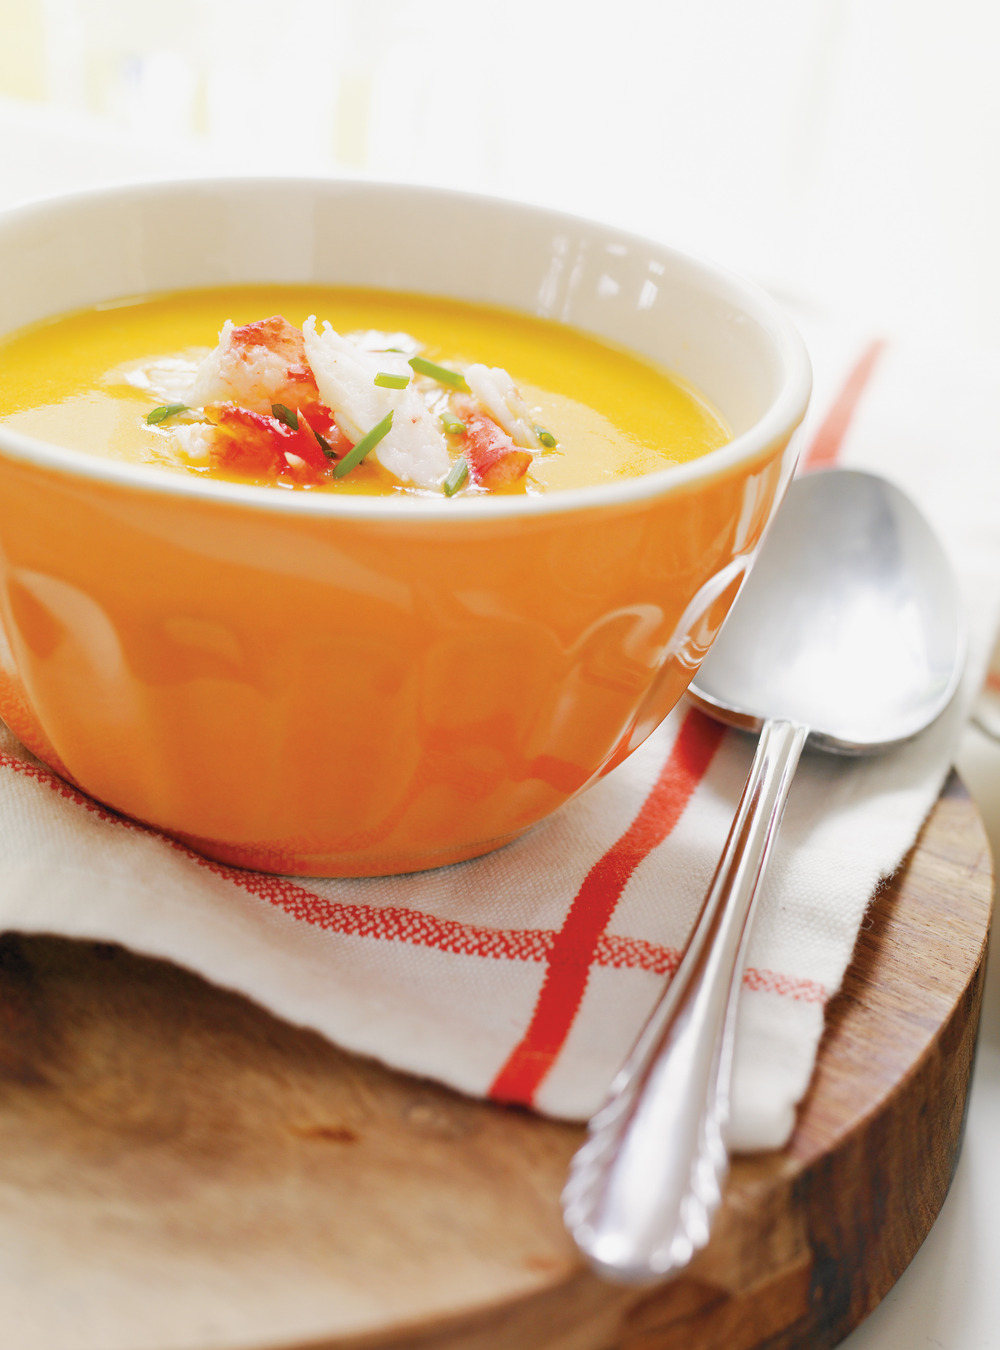 Cream of Bell Pepper Soup with Crab Topping